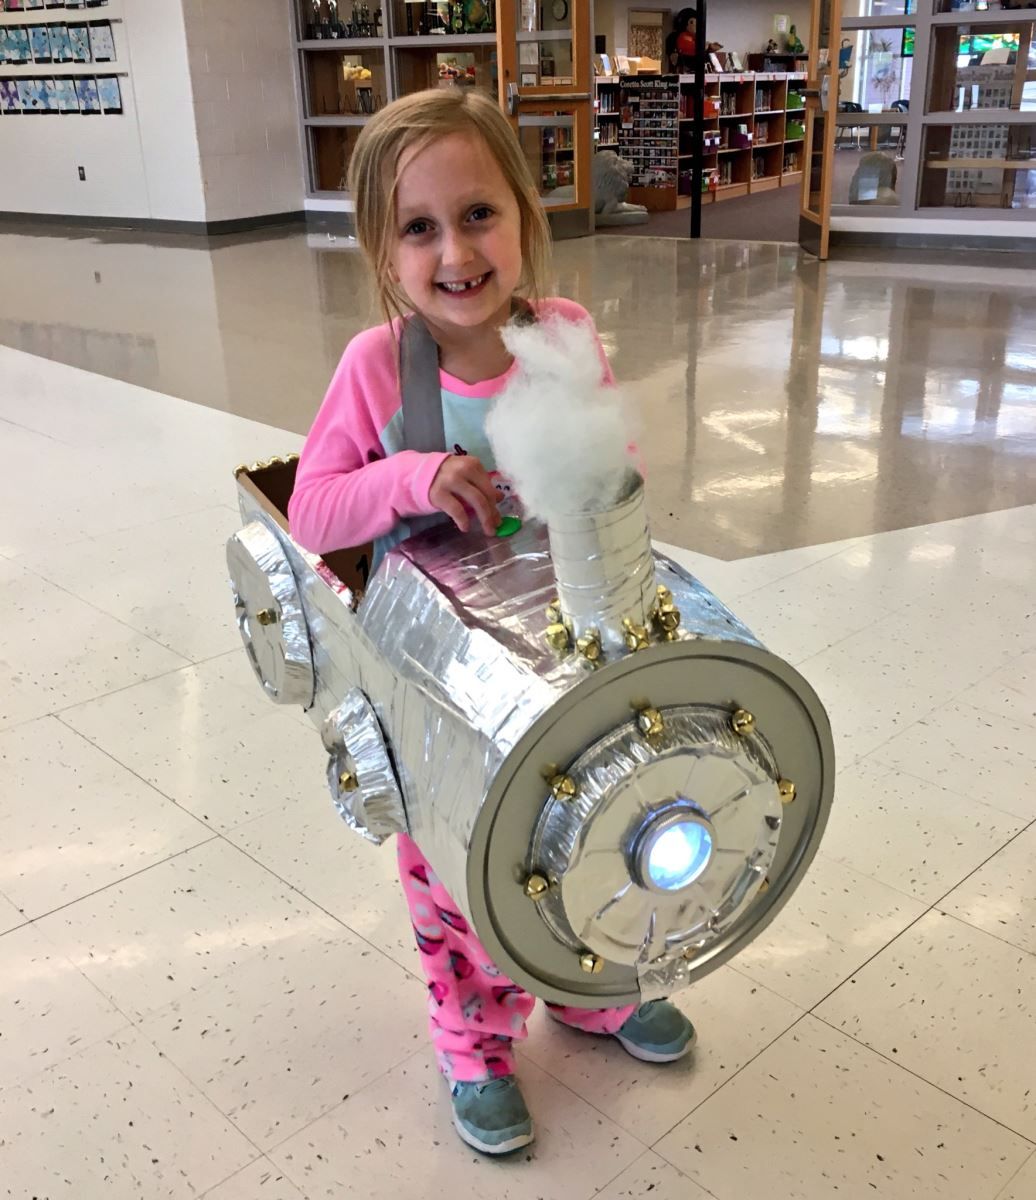 a little girl is wearing a costume that looks like a train engine